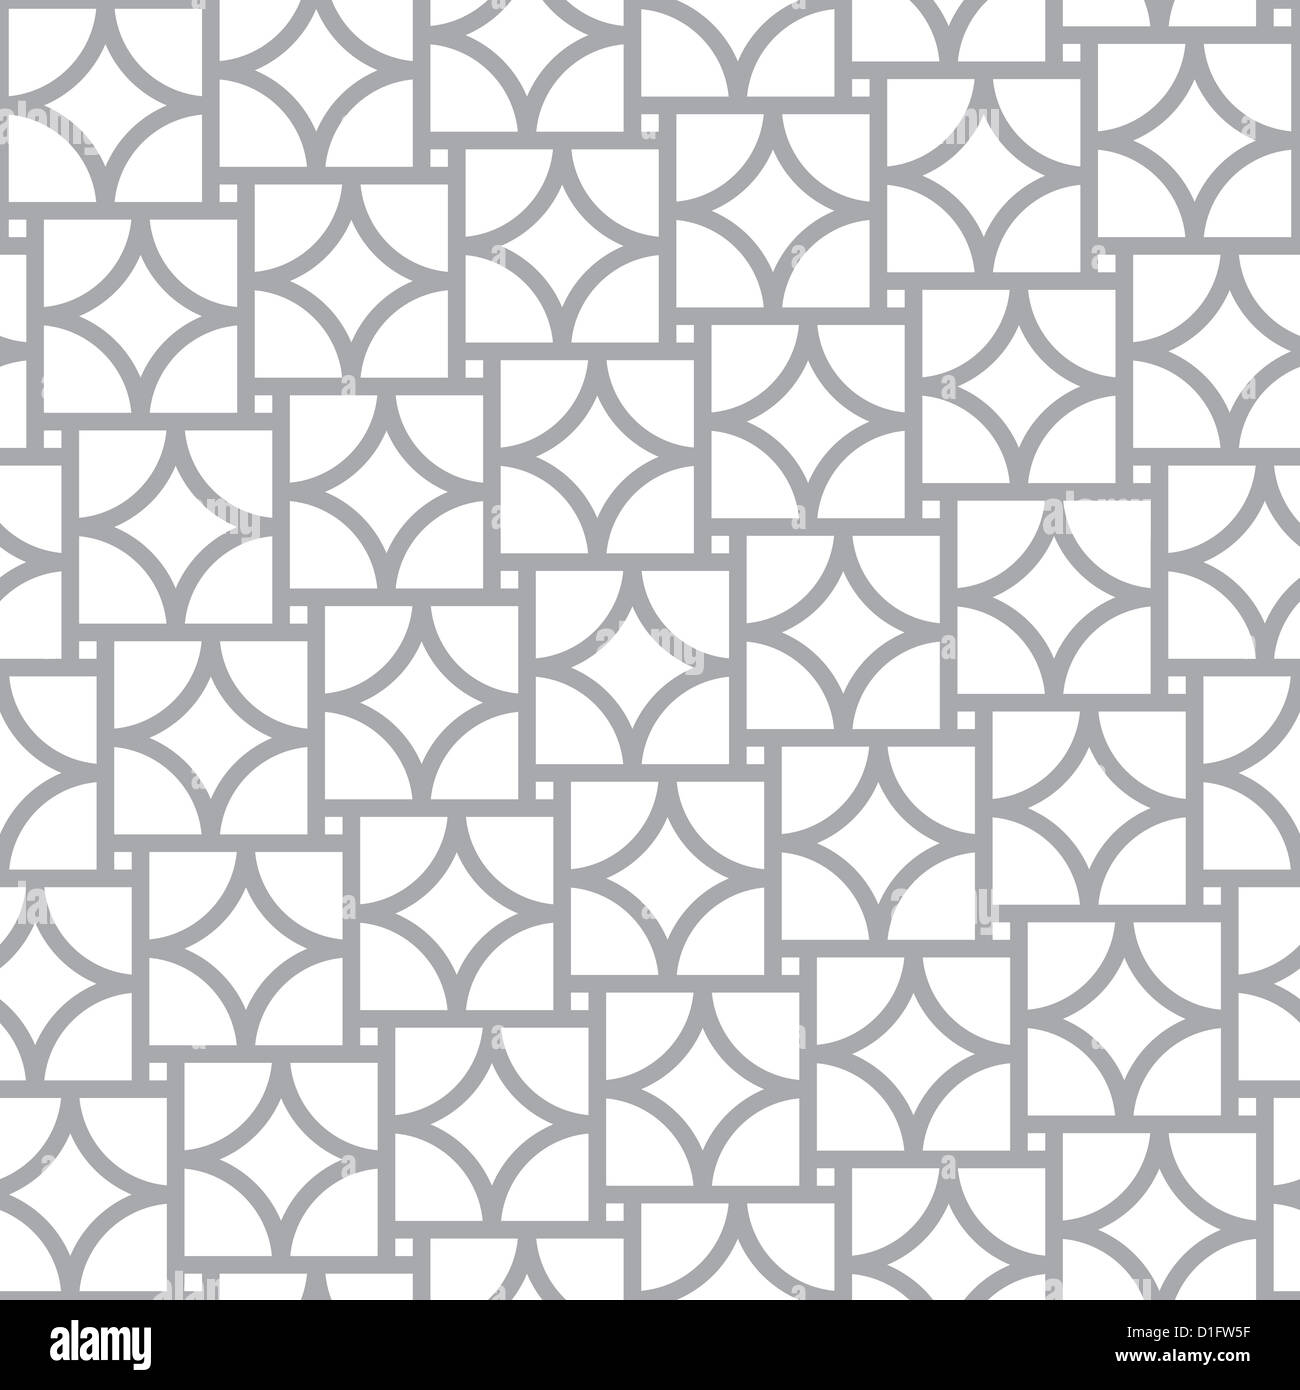 Simple geometric seamless pattern - monochrome abstract elements Stock Photo